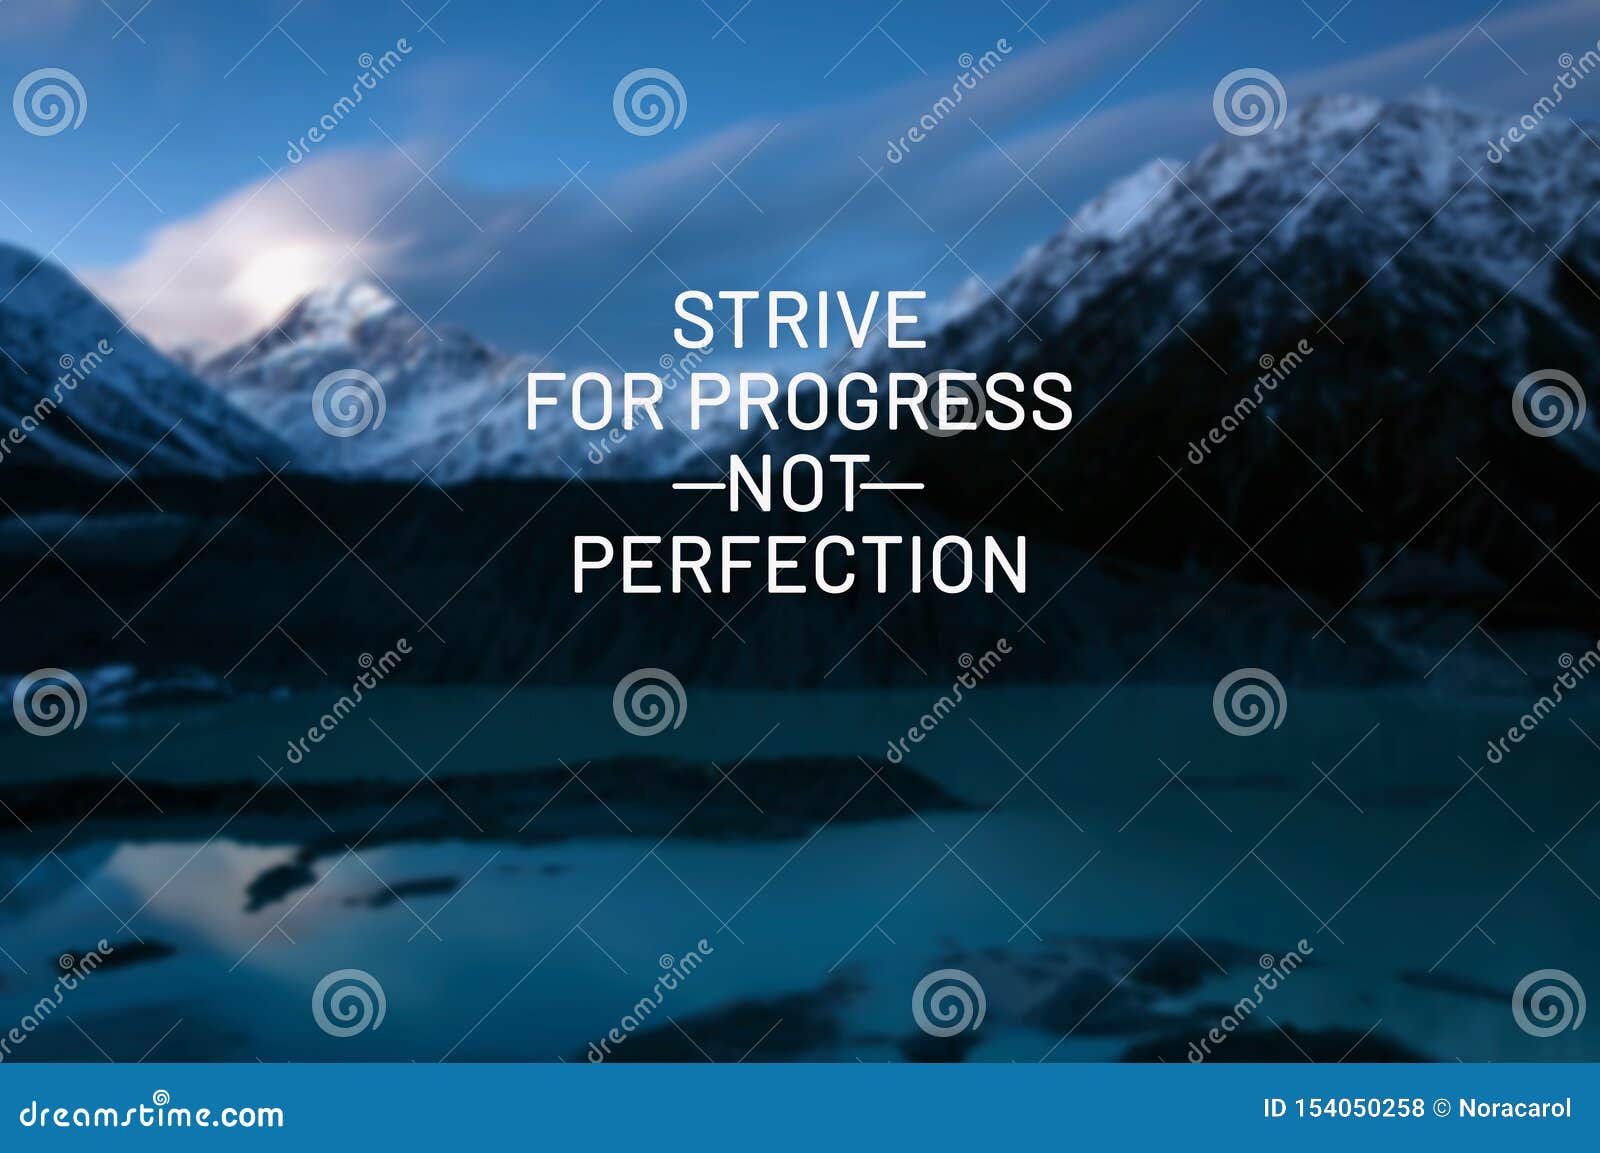 life quotes - strive for progress not perfection